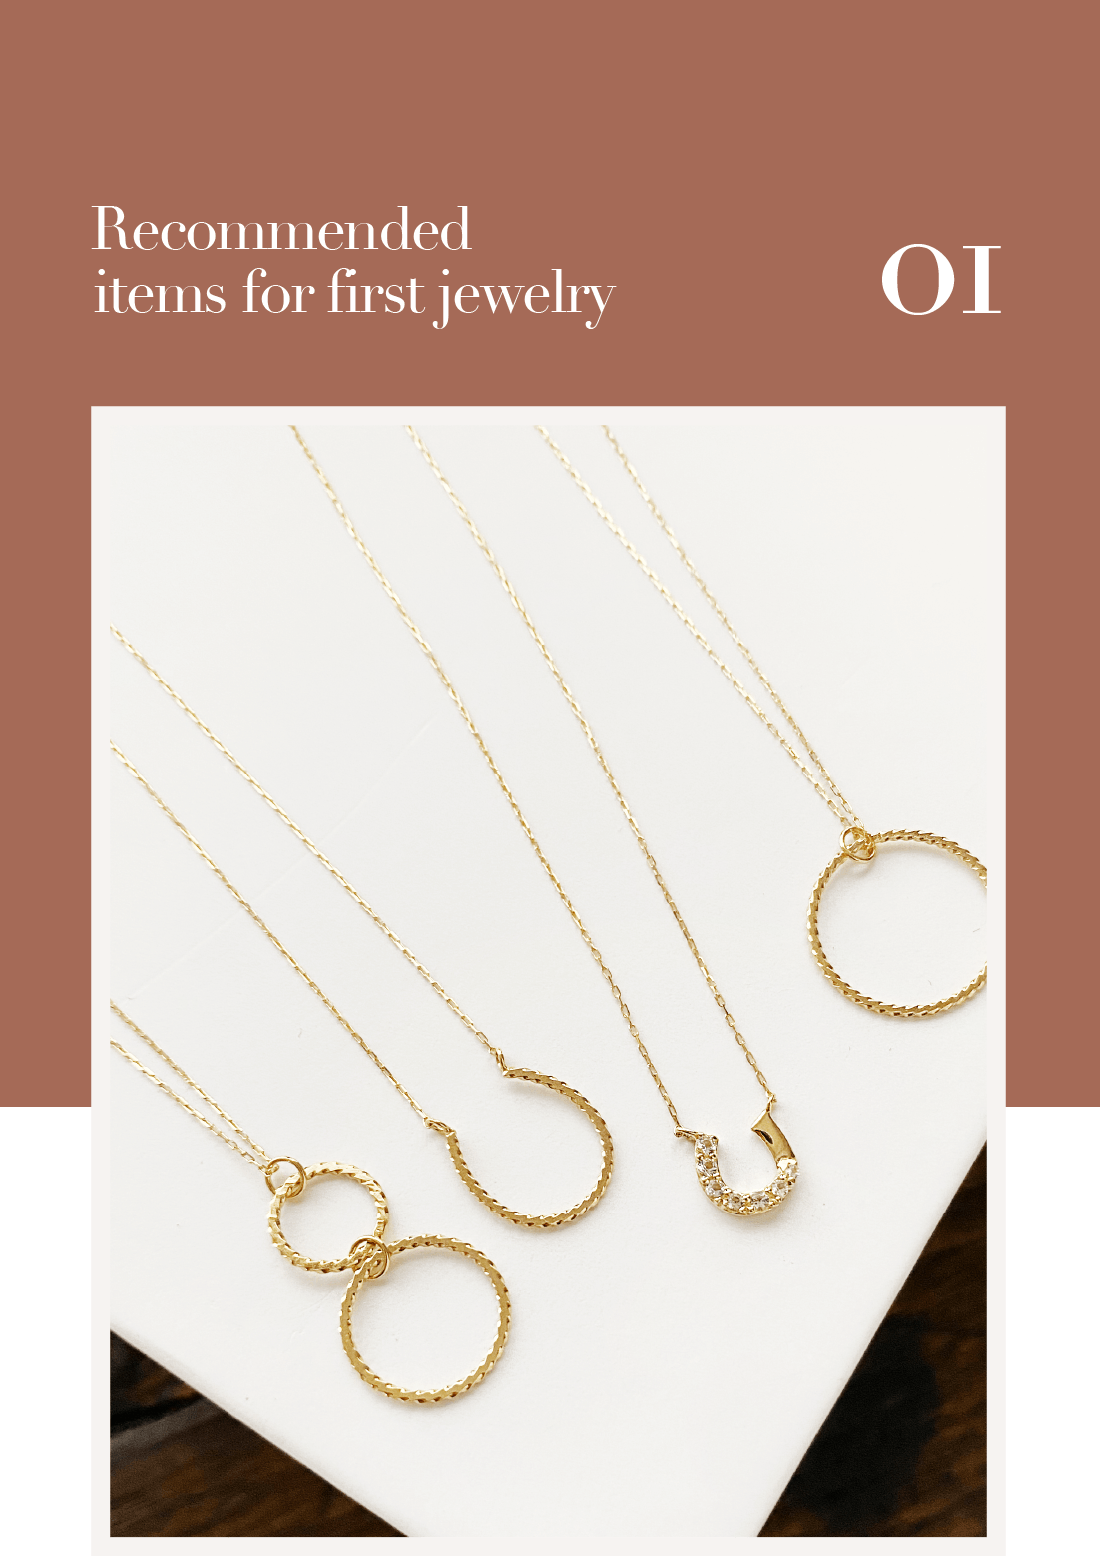 Recommended items for first jewelry